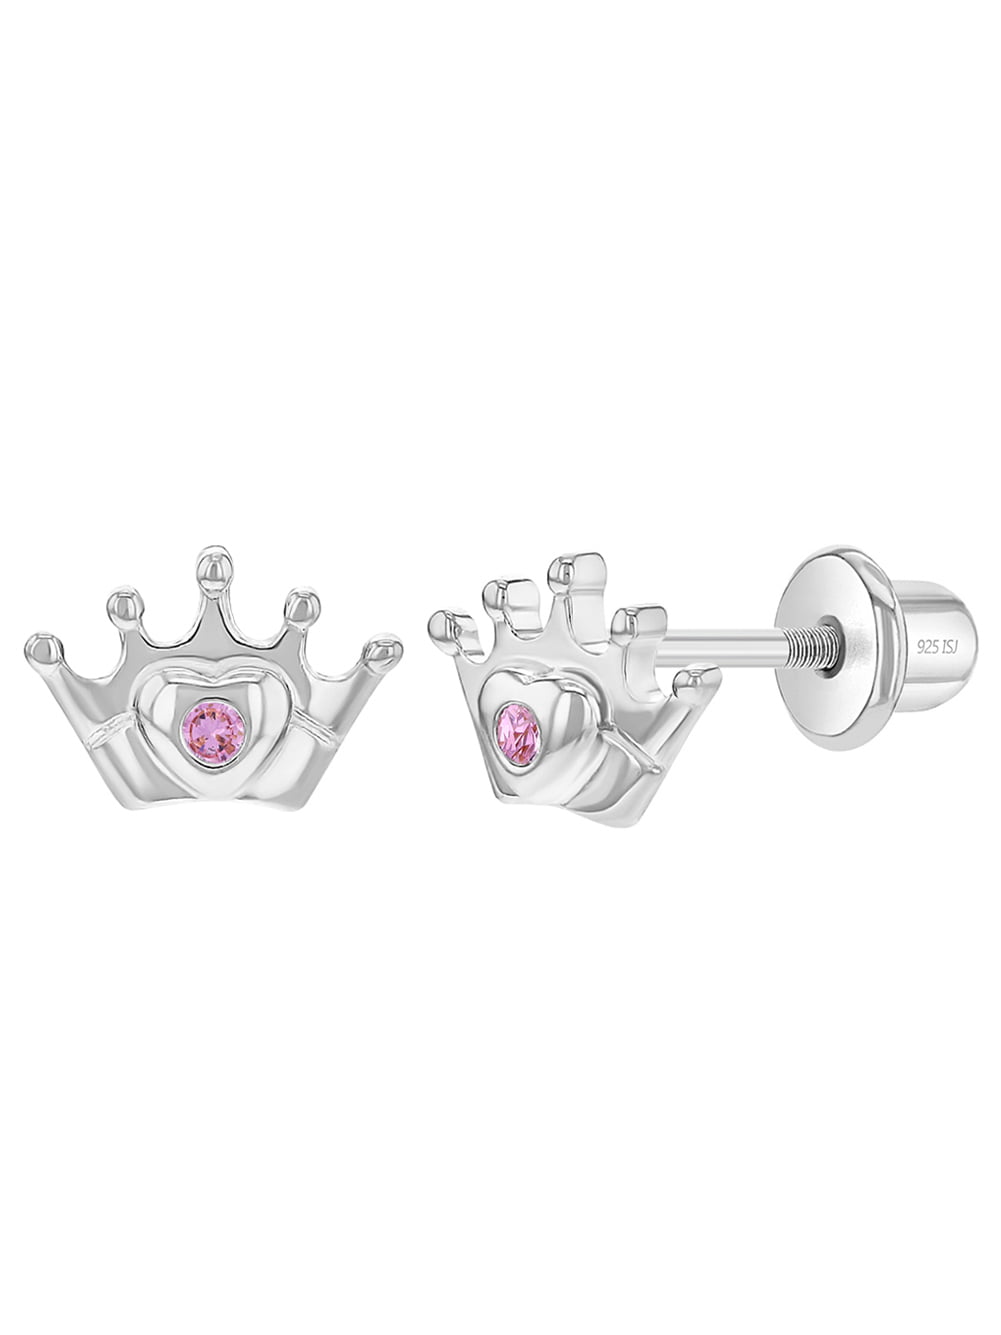 Details about   925 Sterling Silver Princess Crown CZ Screw Back Earrings Toddlers Young Girls 